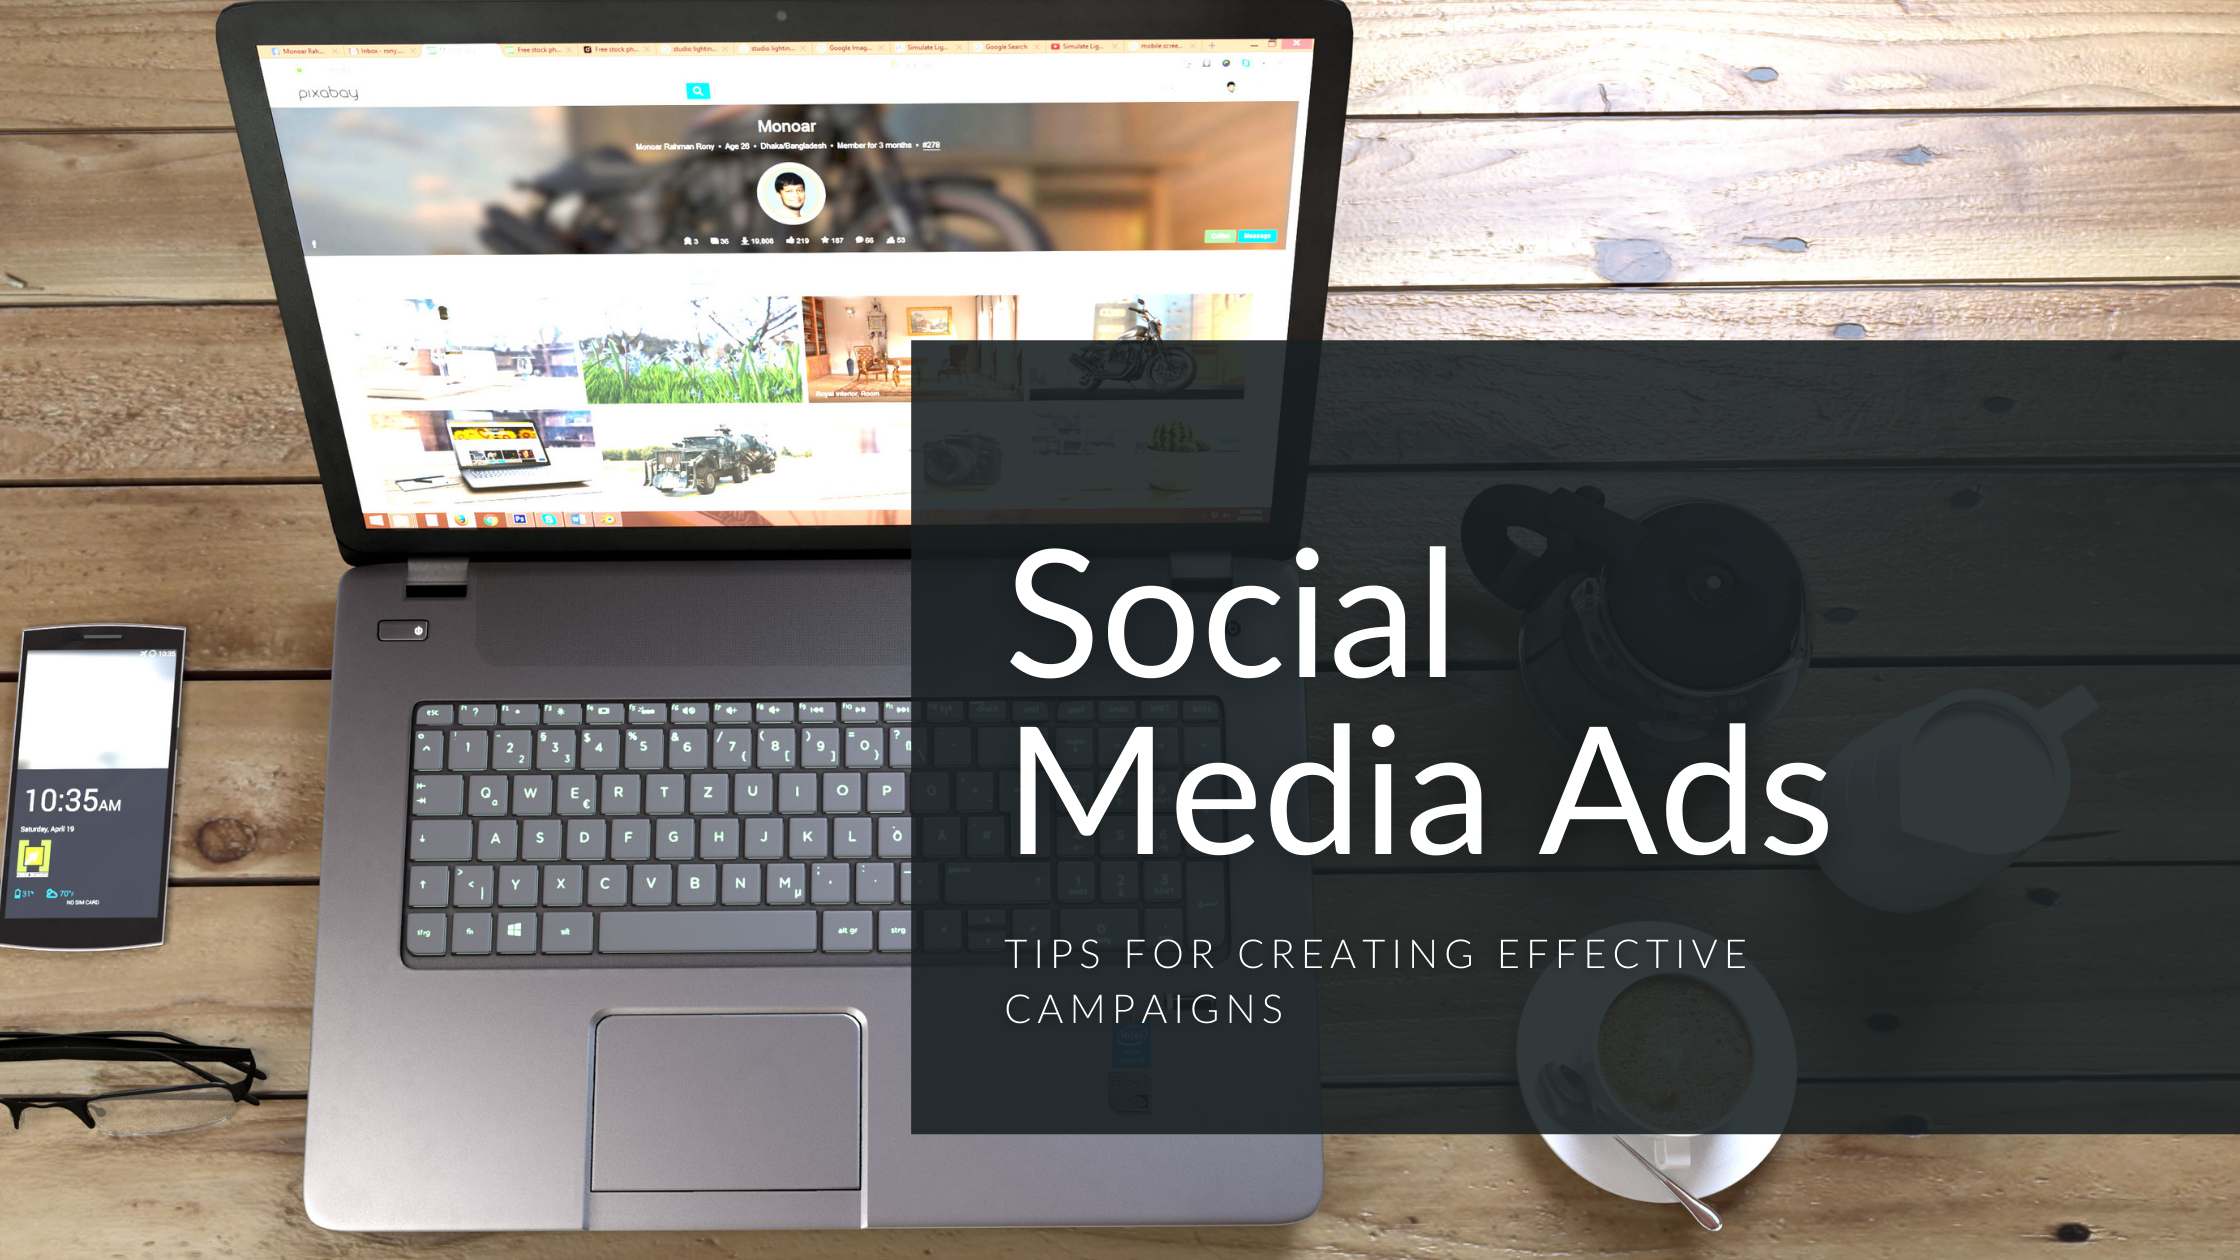 How to Create Effective Social Media Ads